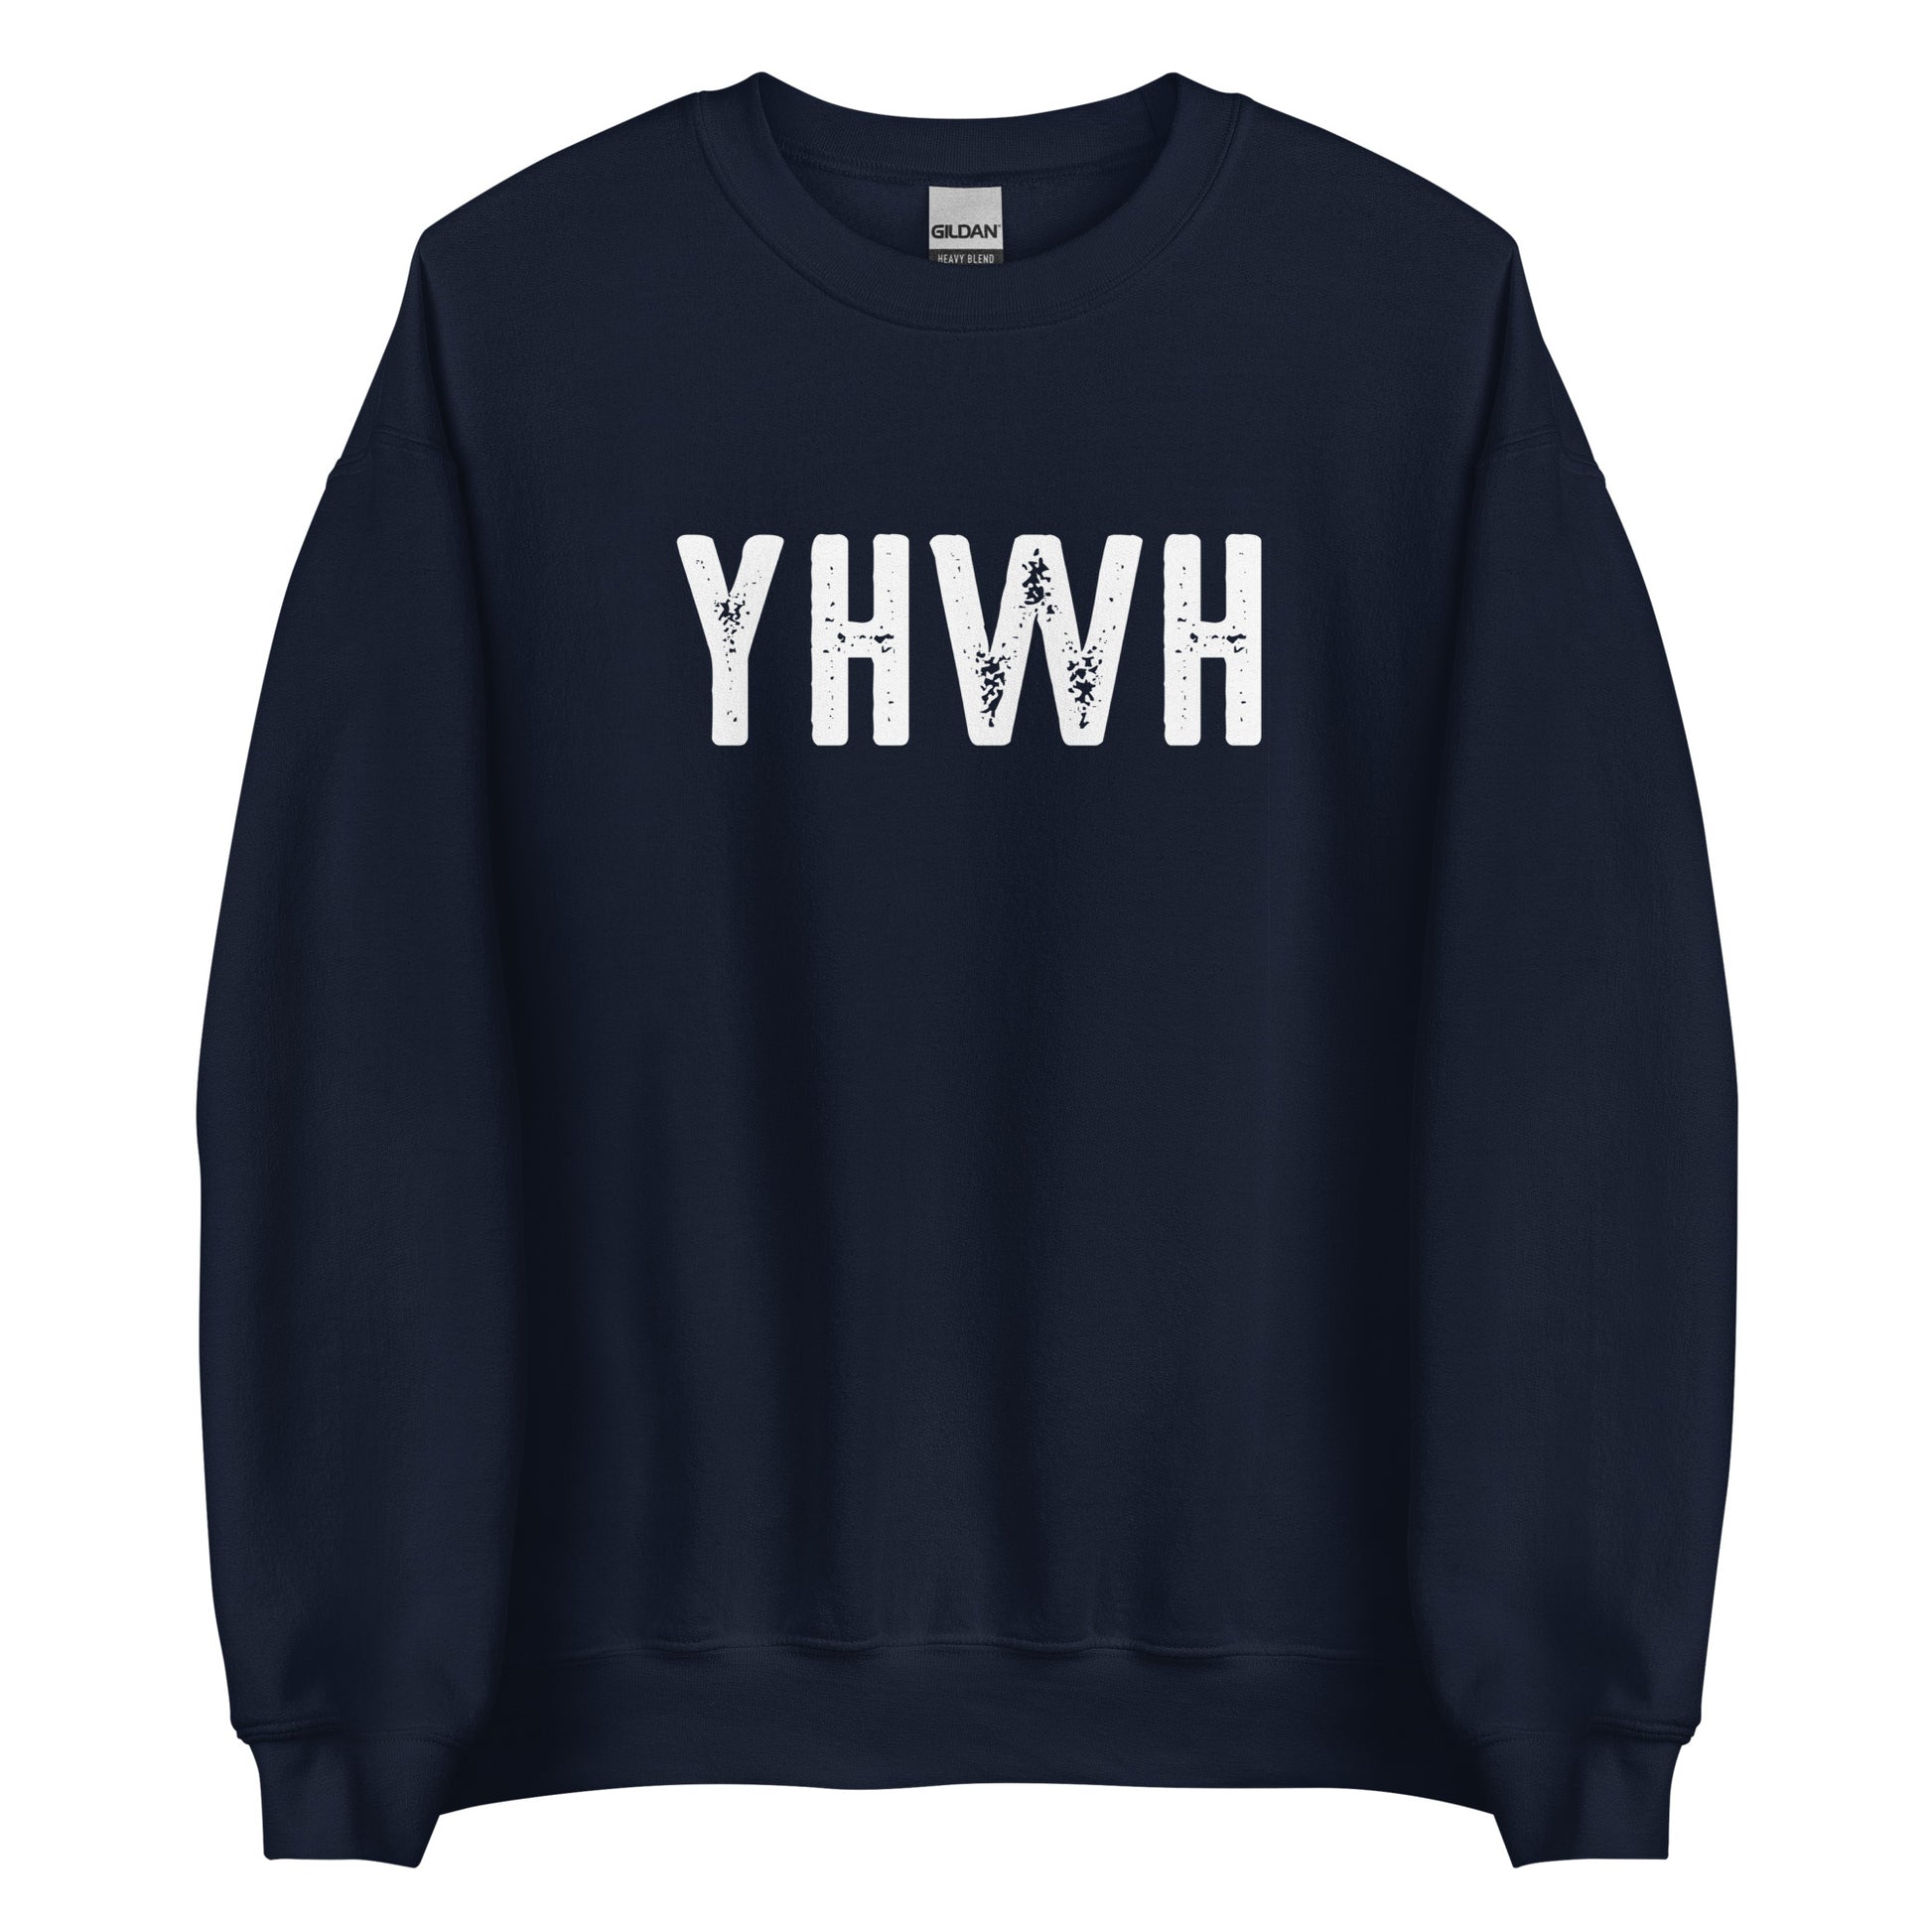 YHWH Hebrew Biblical Name of God Yahweh Christian aesthetic distressed design printed in white on cozy navy blue unisex crewneck sweatshirt for men and women